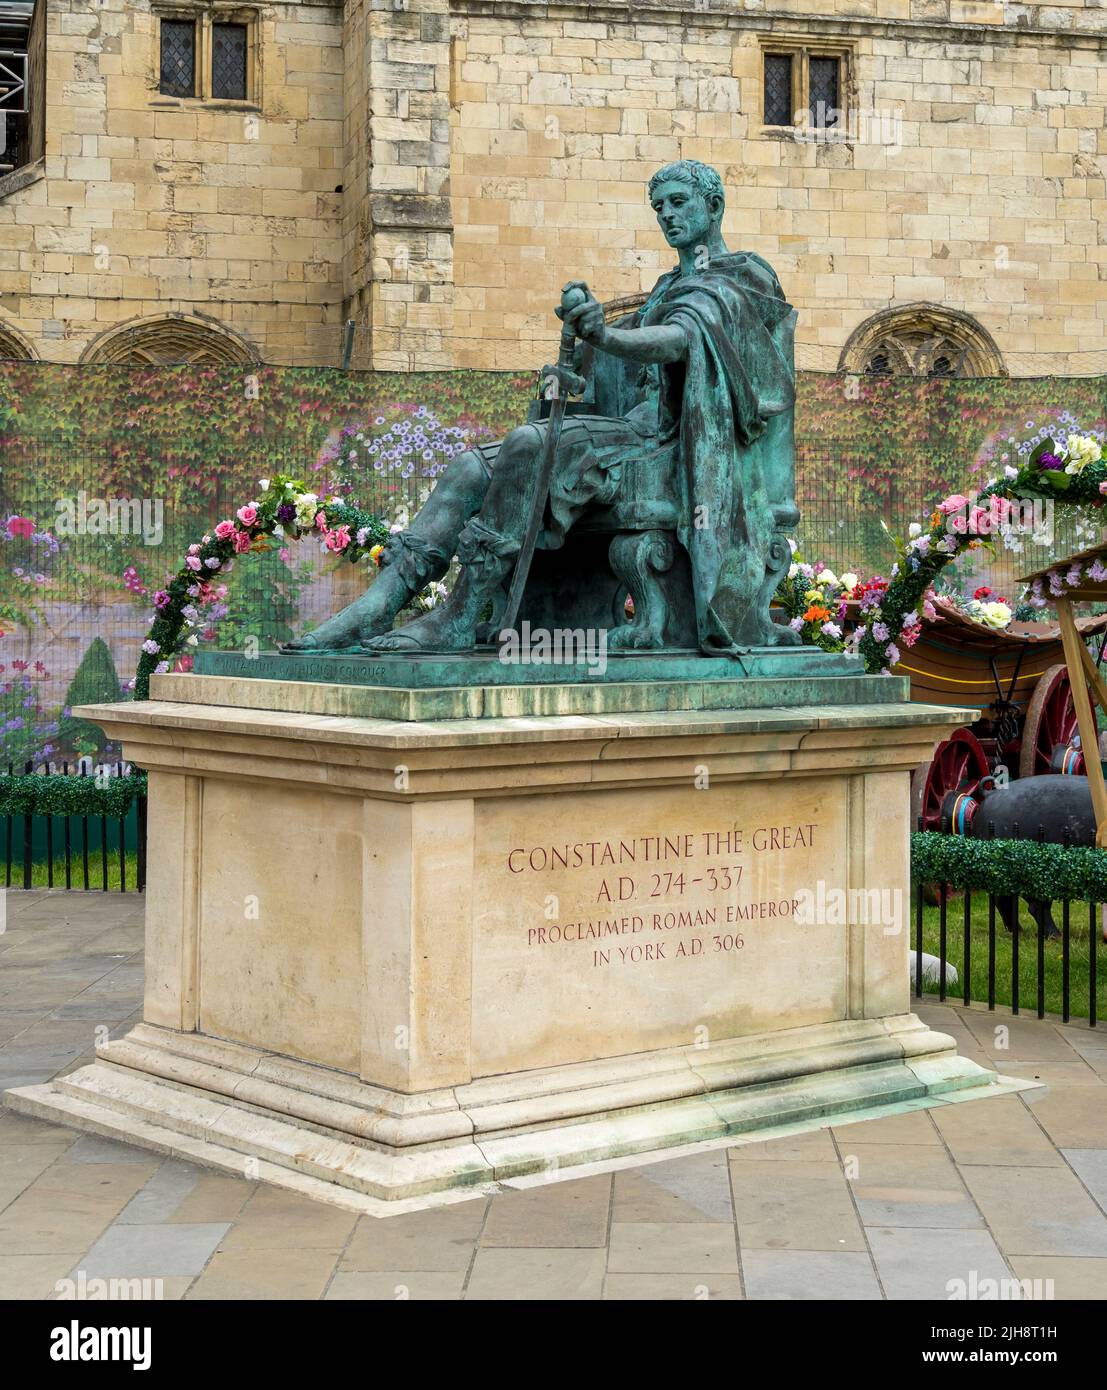 Statue in Minster Yard of Constantine The Great proclaimed Roman Emperor in York AD 306 Stock Photo